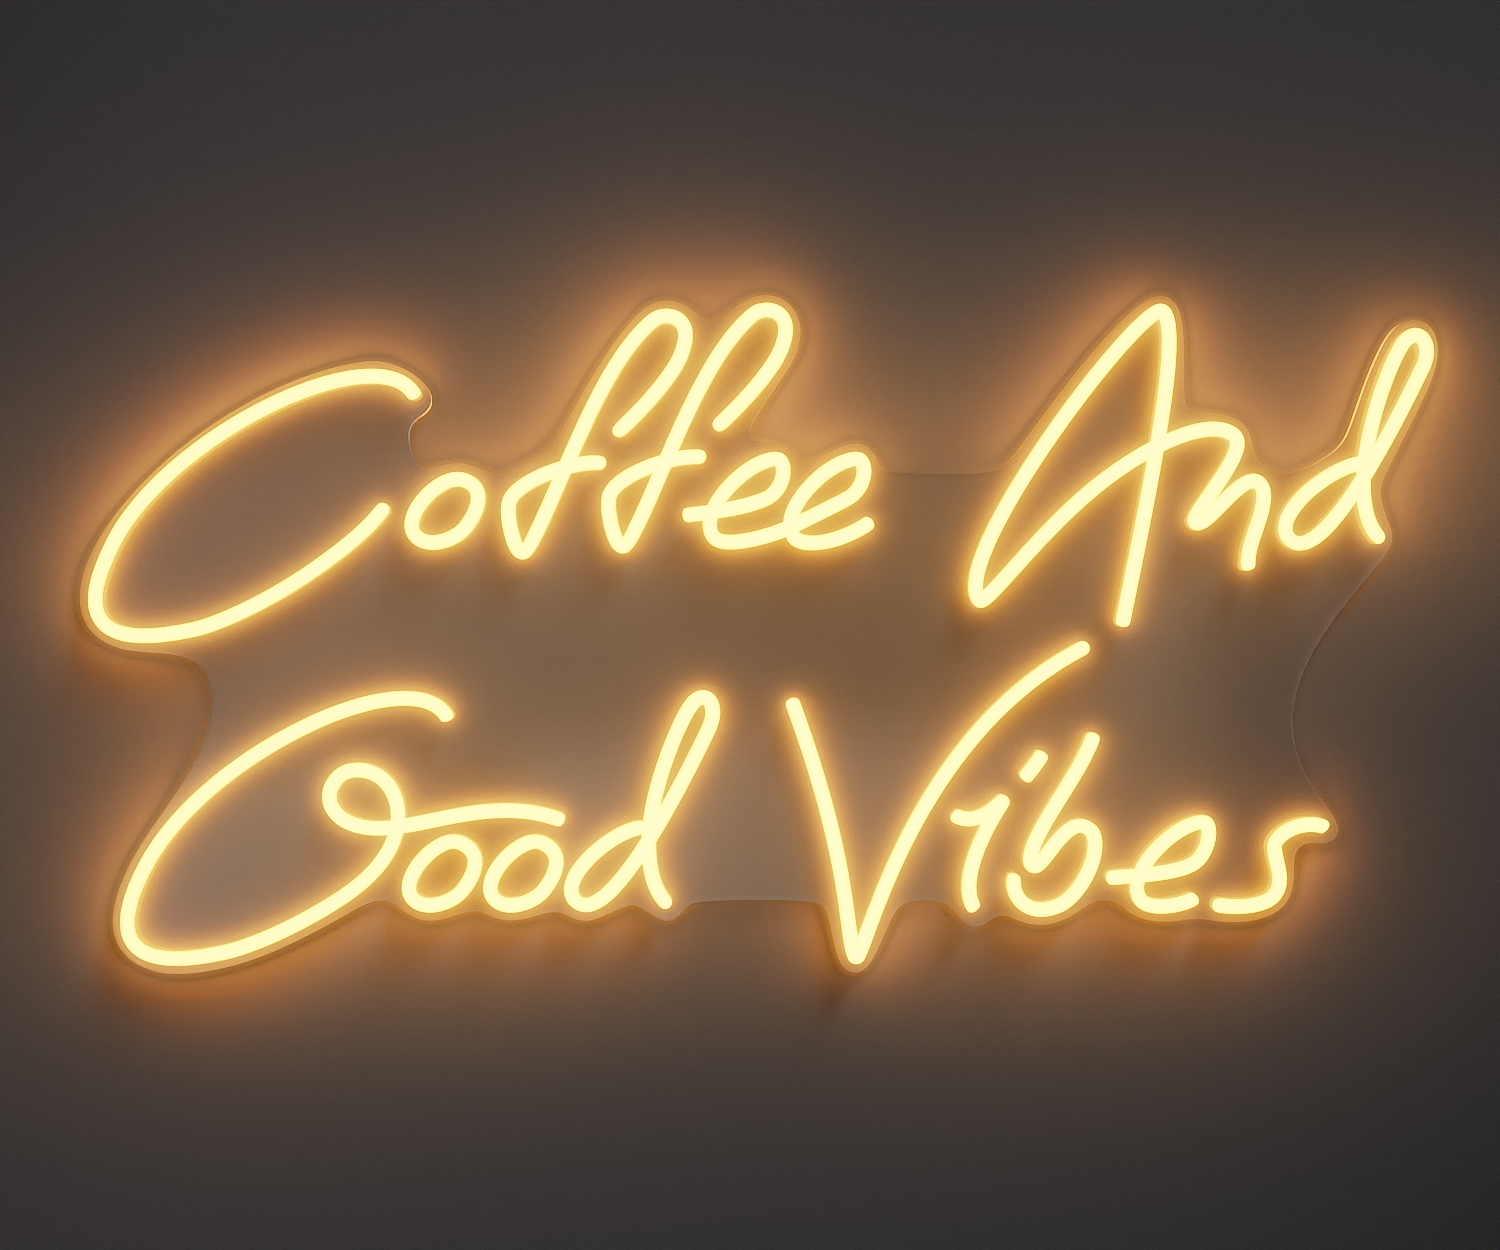 warm white neon sign that says coffee and good vibes